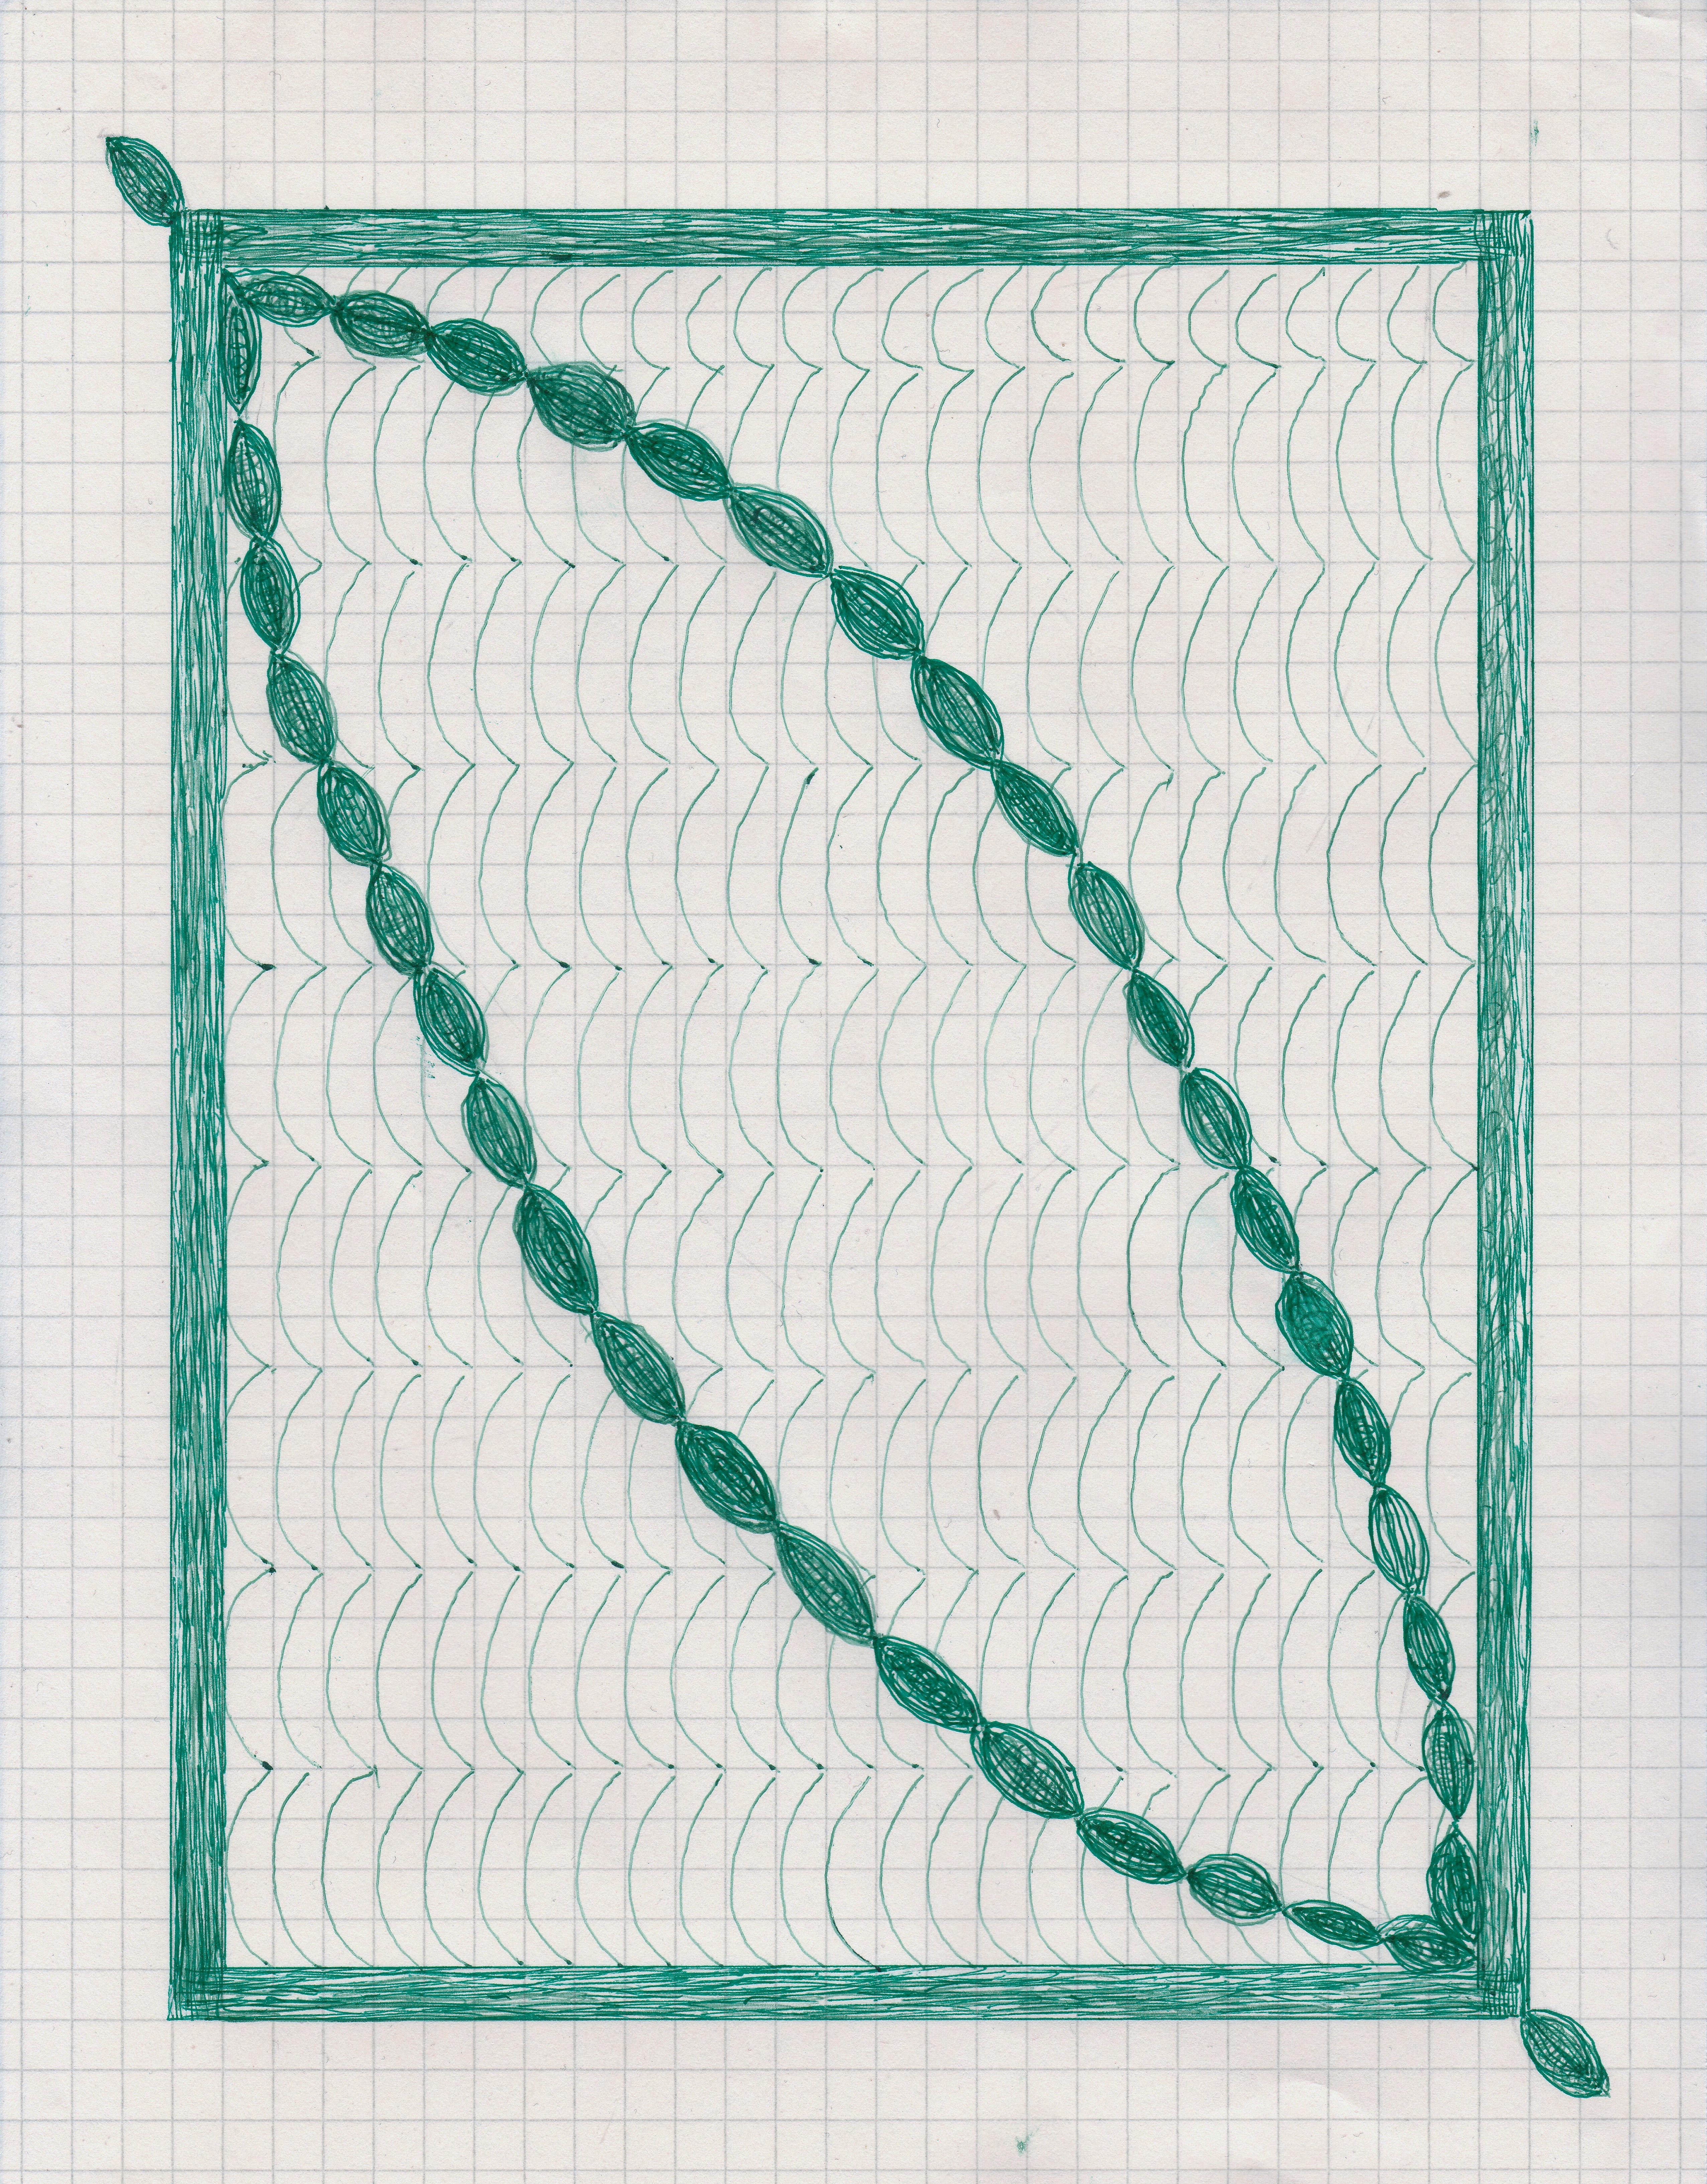 Caroline Blum Abstract Drawing - In or Out, green ink drawing on graph paper, geometric abstraction